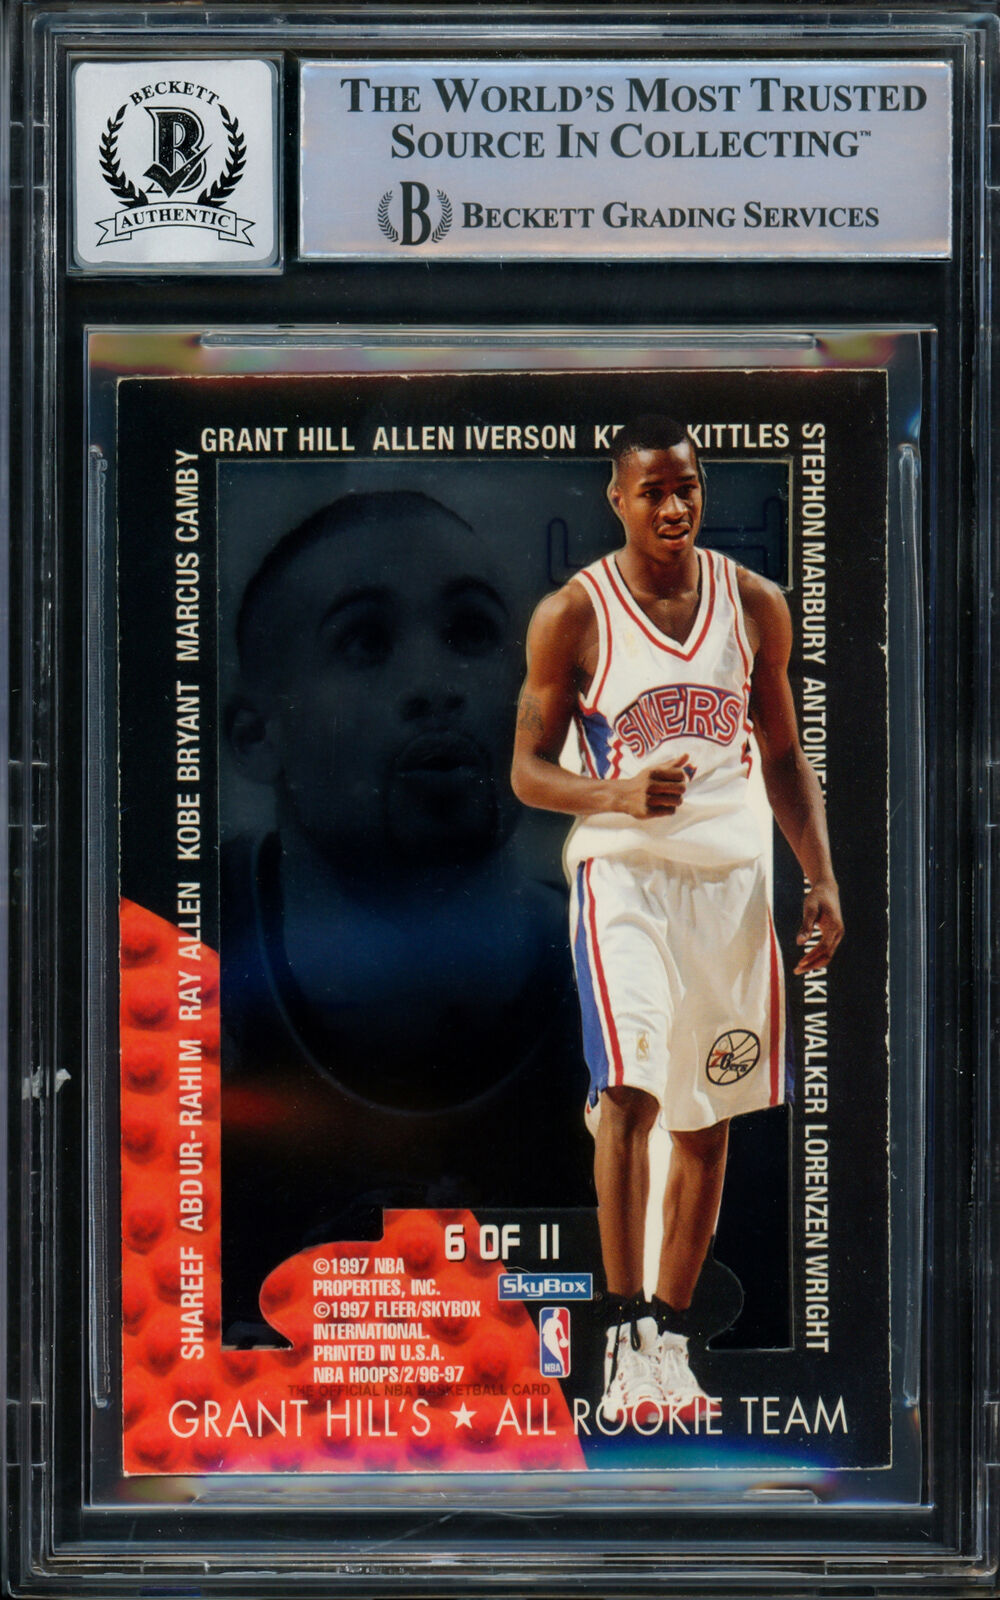 Allen Iverson 1996-97 Hoops Grant Hill's All Rookie Team RC Gem 10